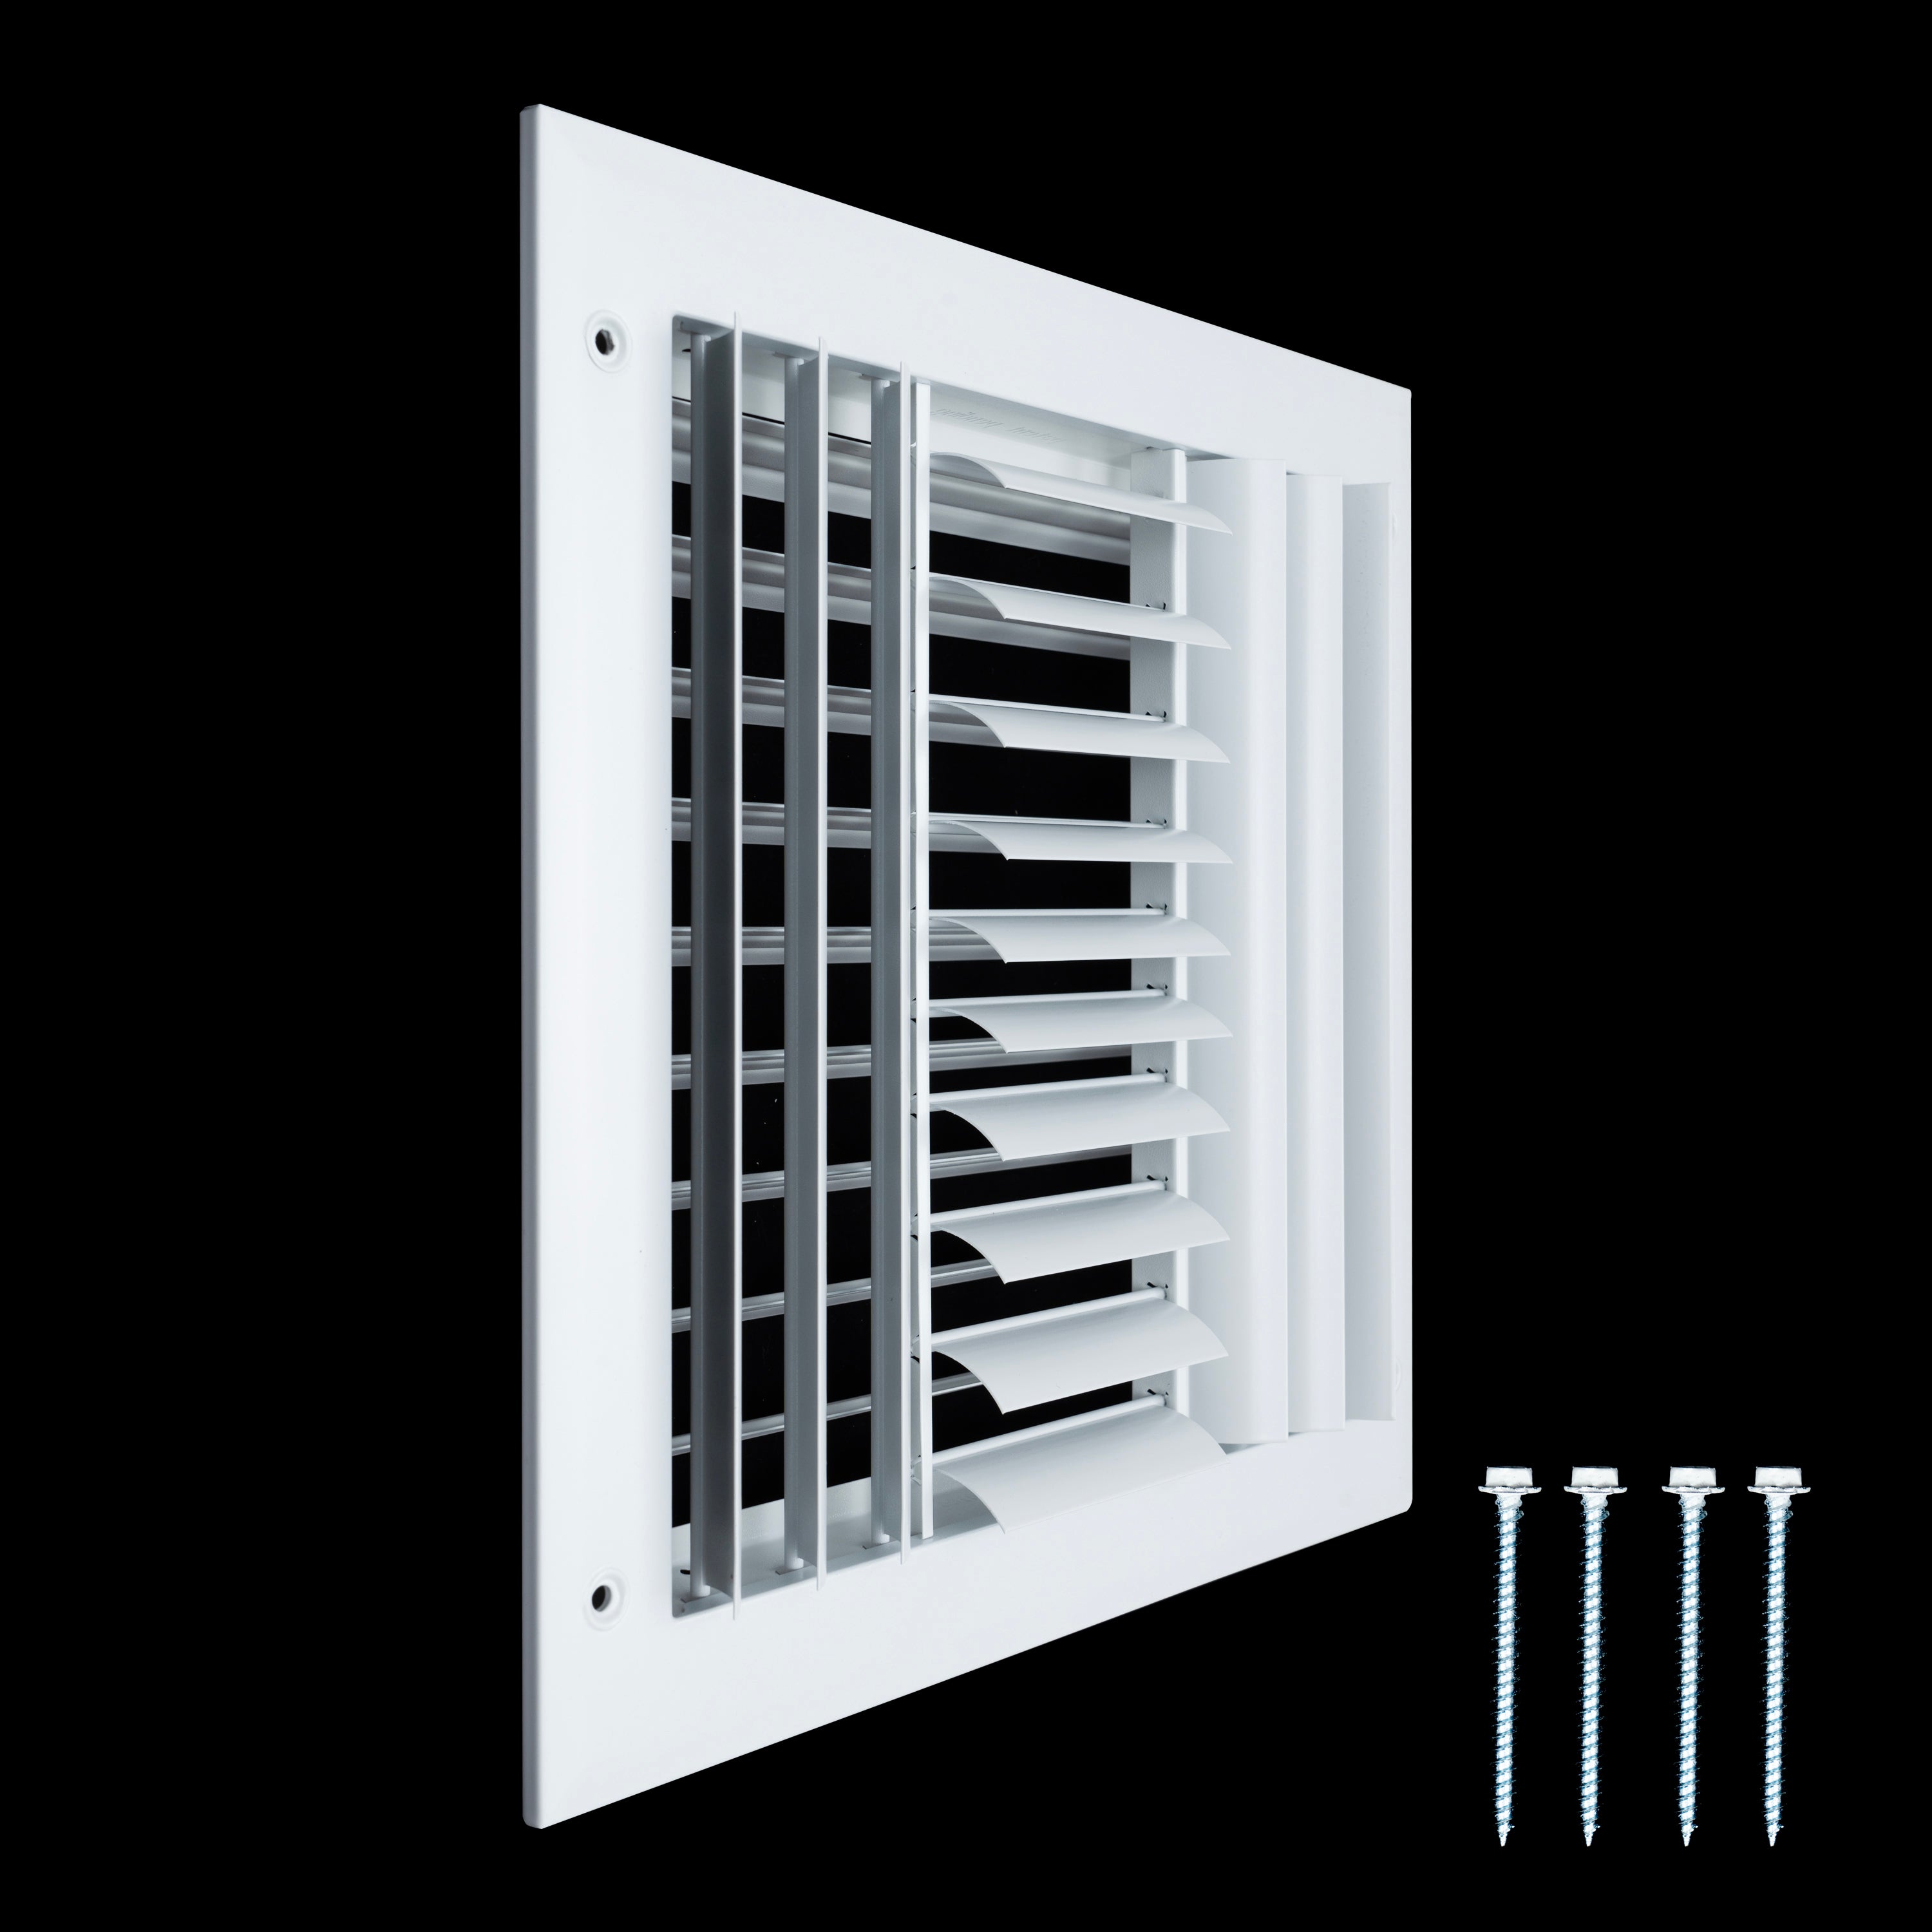 10"W x 10"H [Duct Opening] Aluminum 3-WAY Adjustable Air Supply Grille | Register Vent Cover Grill for Sidewall and Ceiling | White | Outer Dimensions: 11.75"W x 11.75"